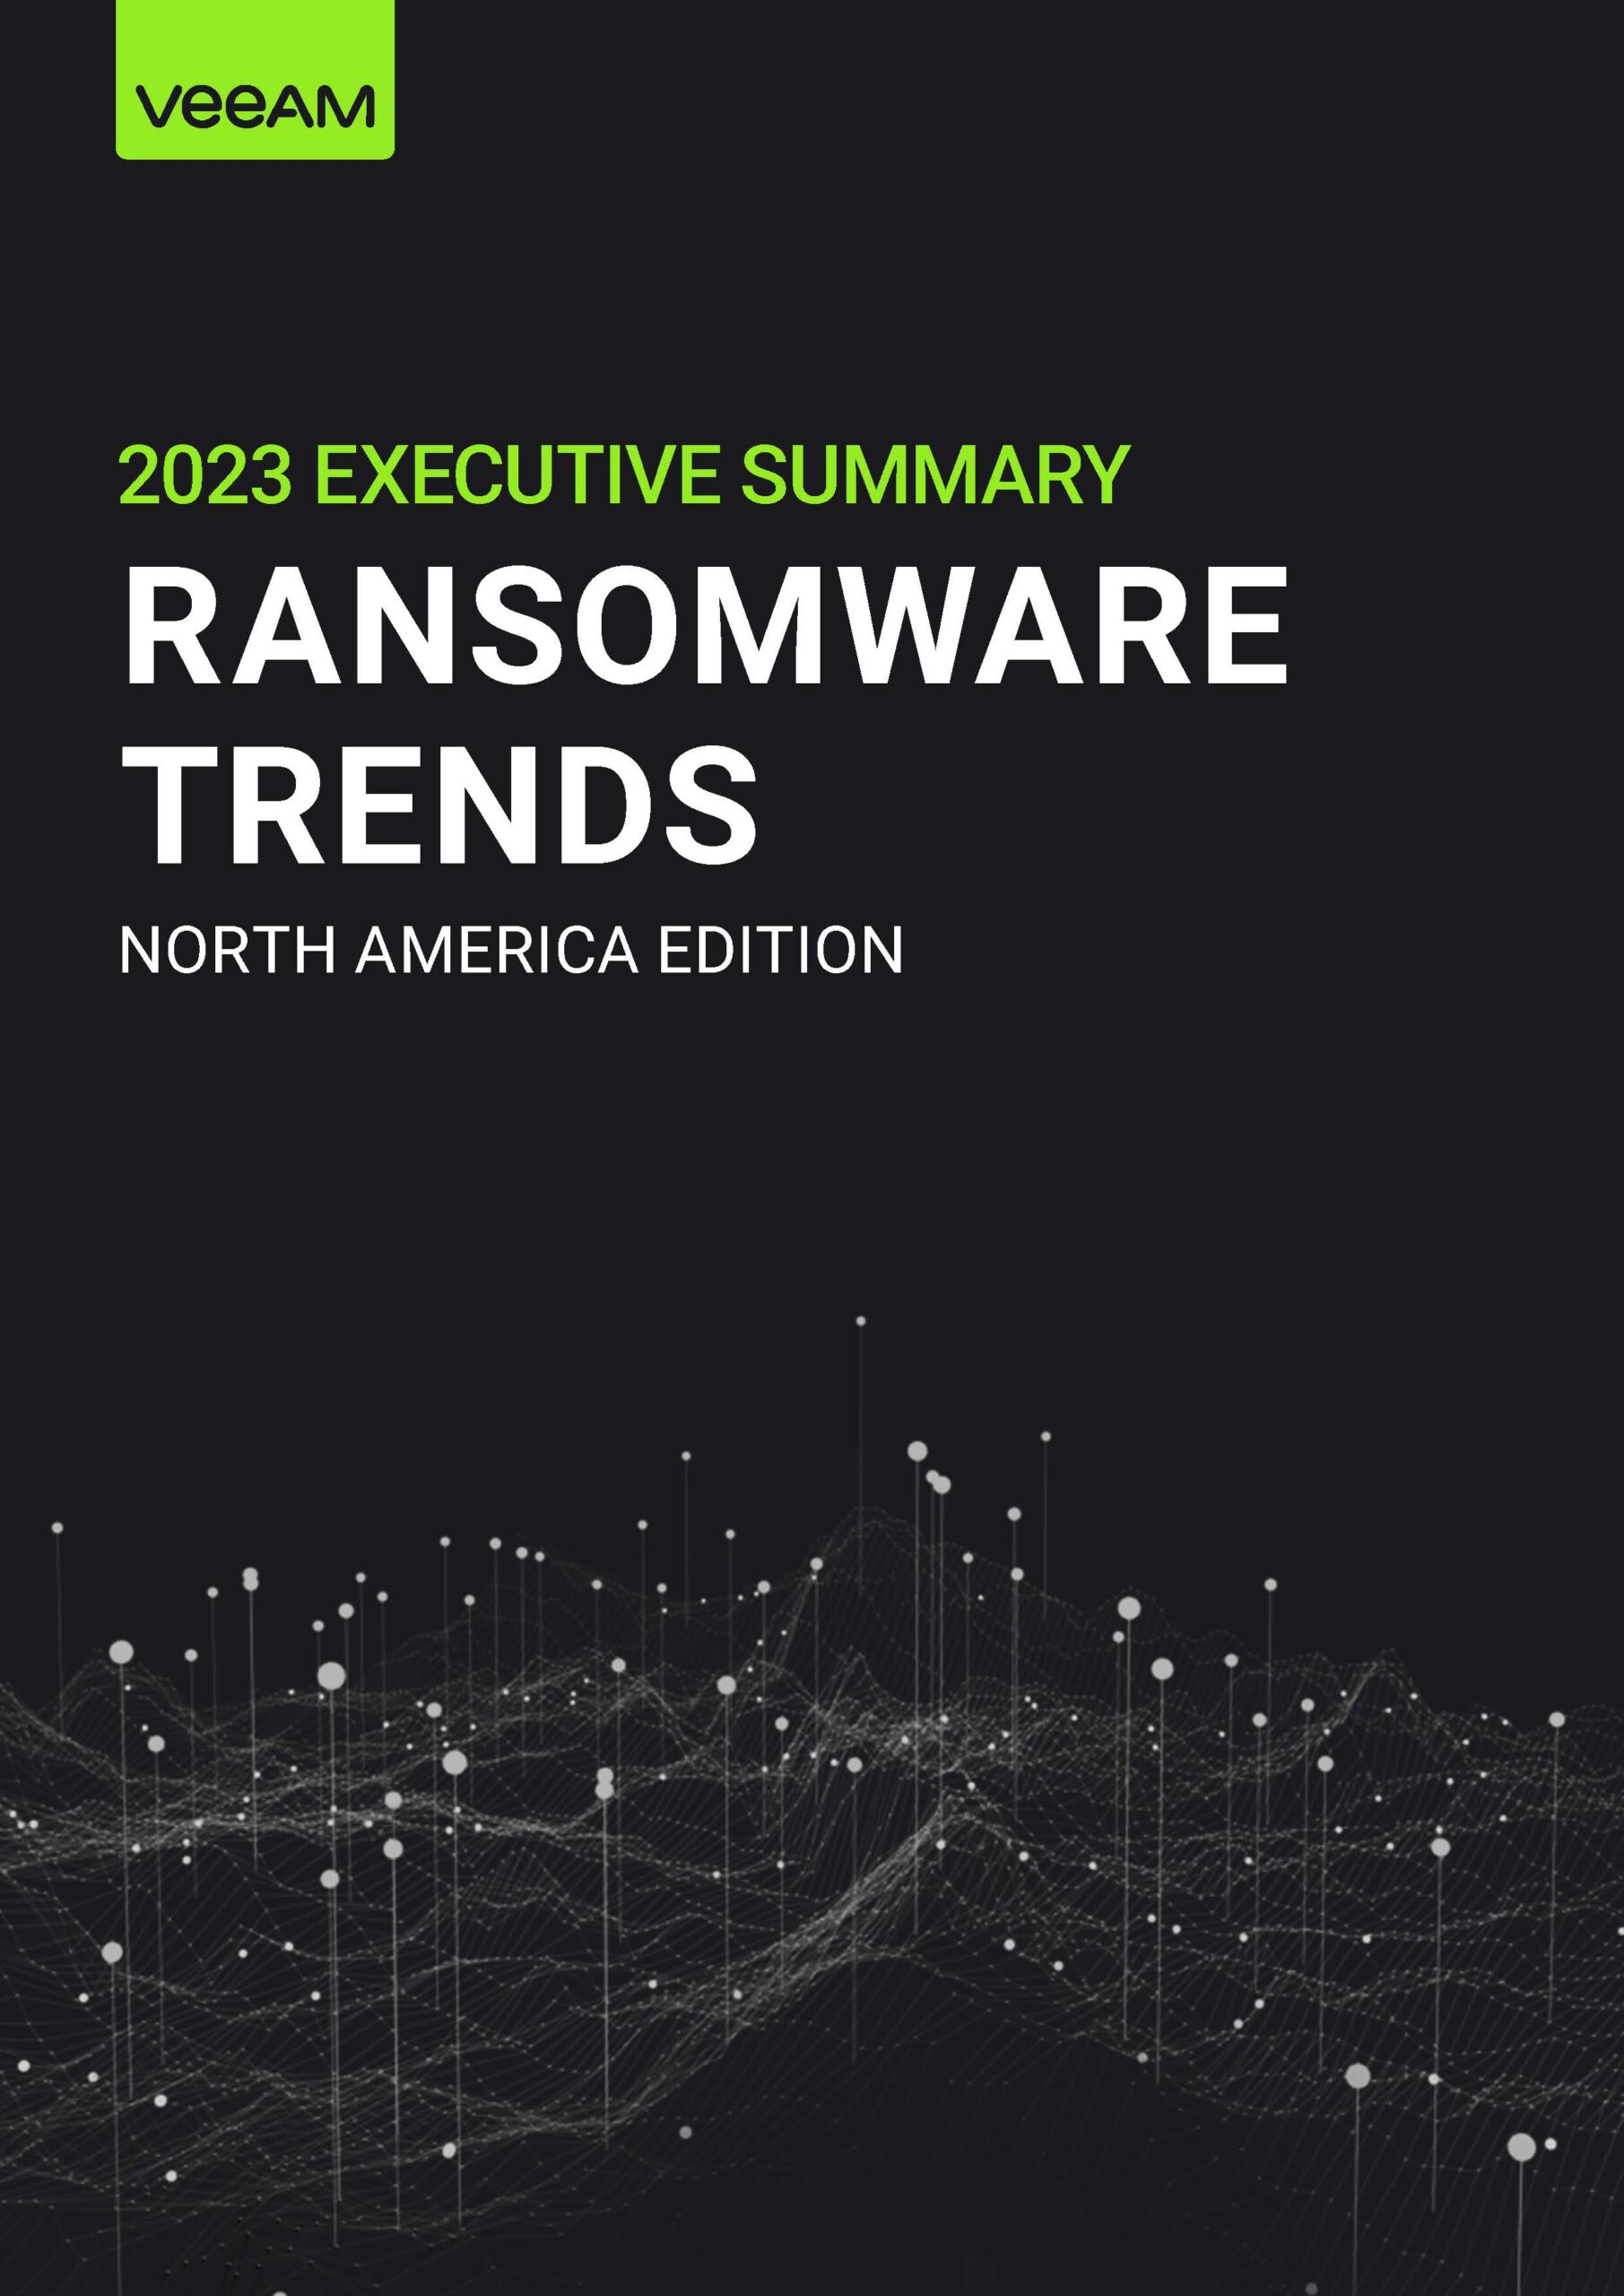 ransomware trends executive summary na Page 1 scaled